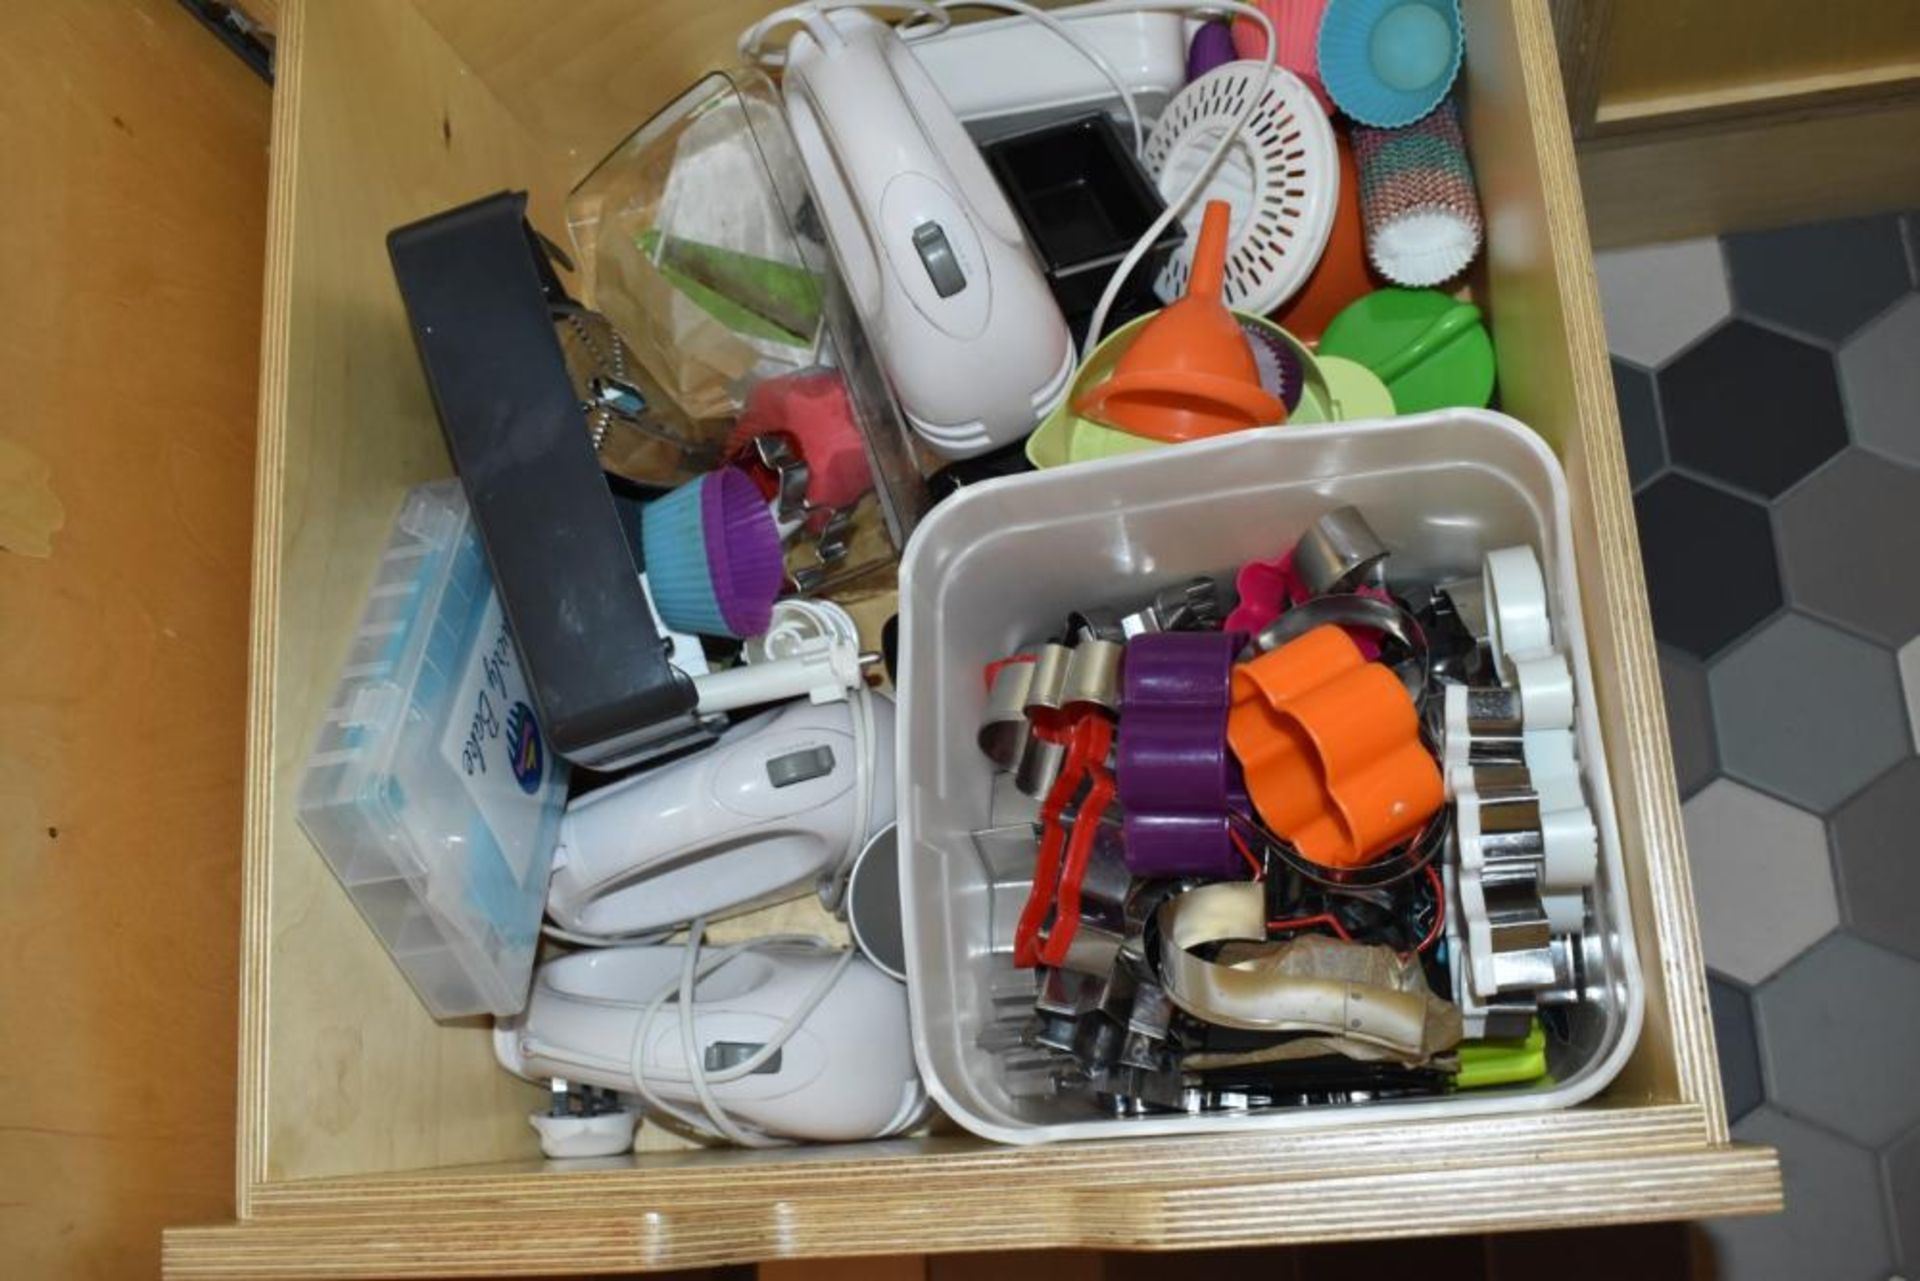 Large Selection of Kitchen Utensils and Baking Accessories - Contents of Four Large Drawers - Includ - Image 8 of 10